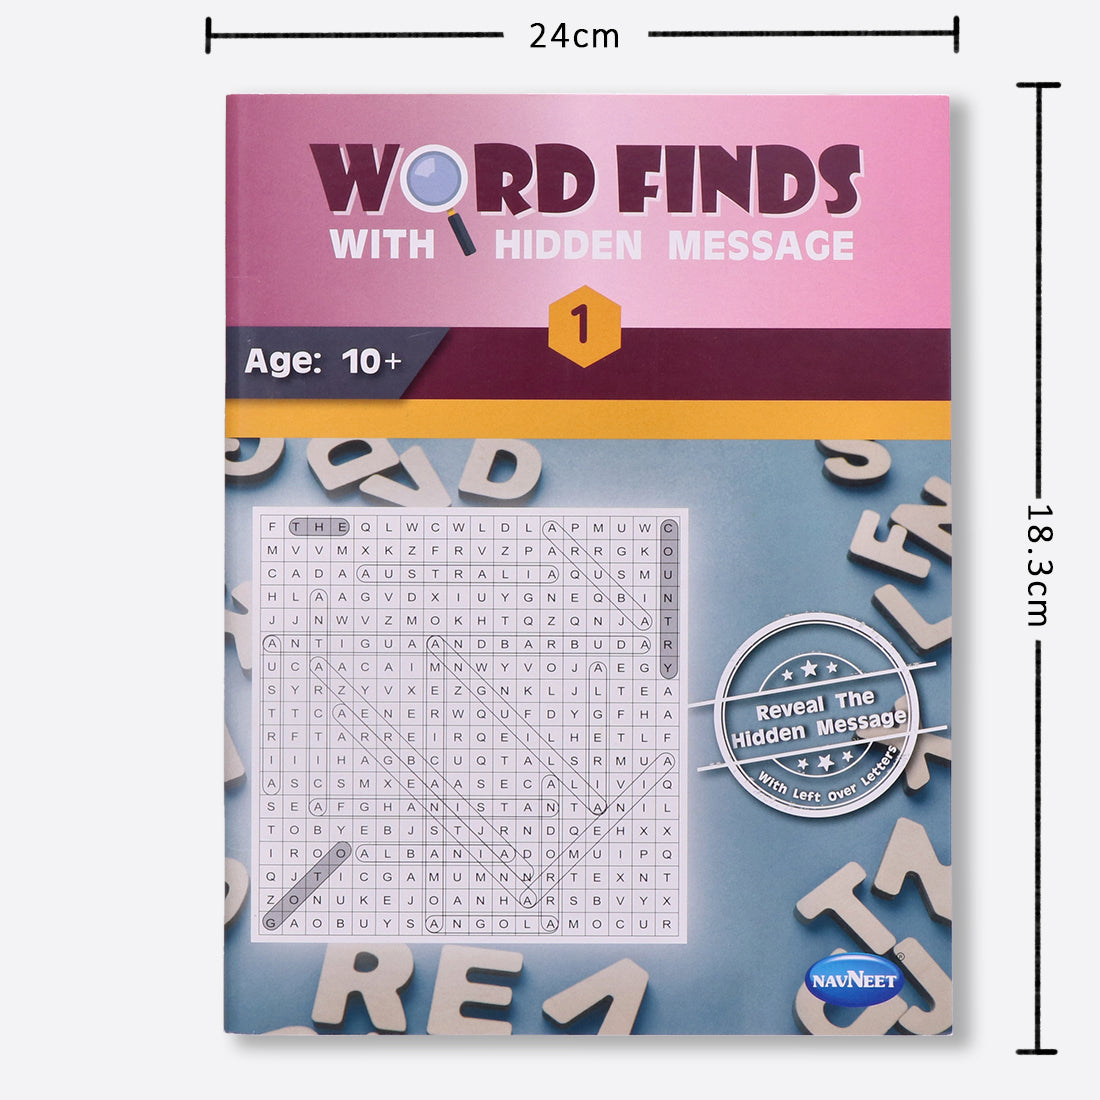 Navneet Word finds with Hidden Message Book 1 and 2-Develops Essential Skills- A collection of activities